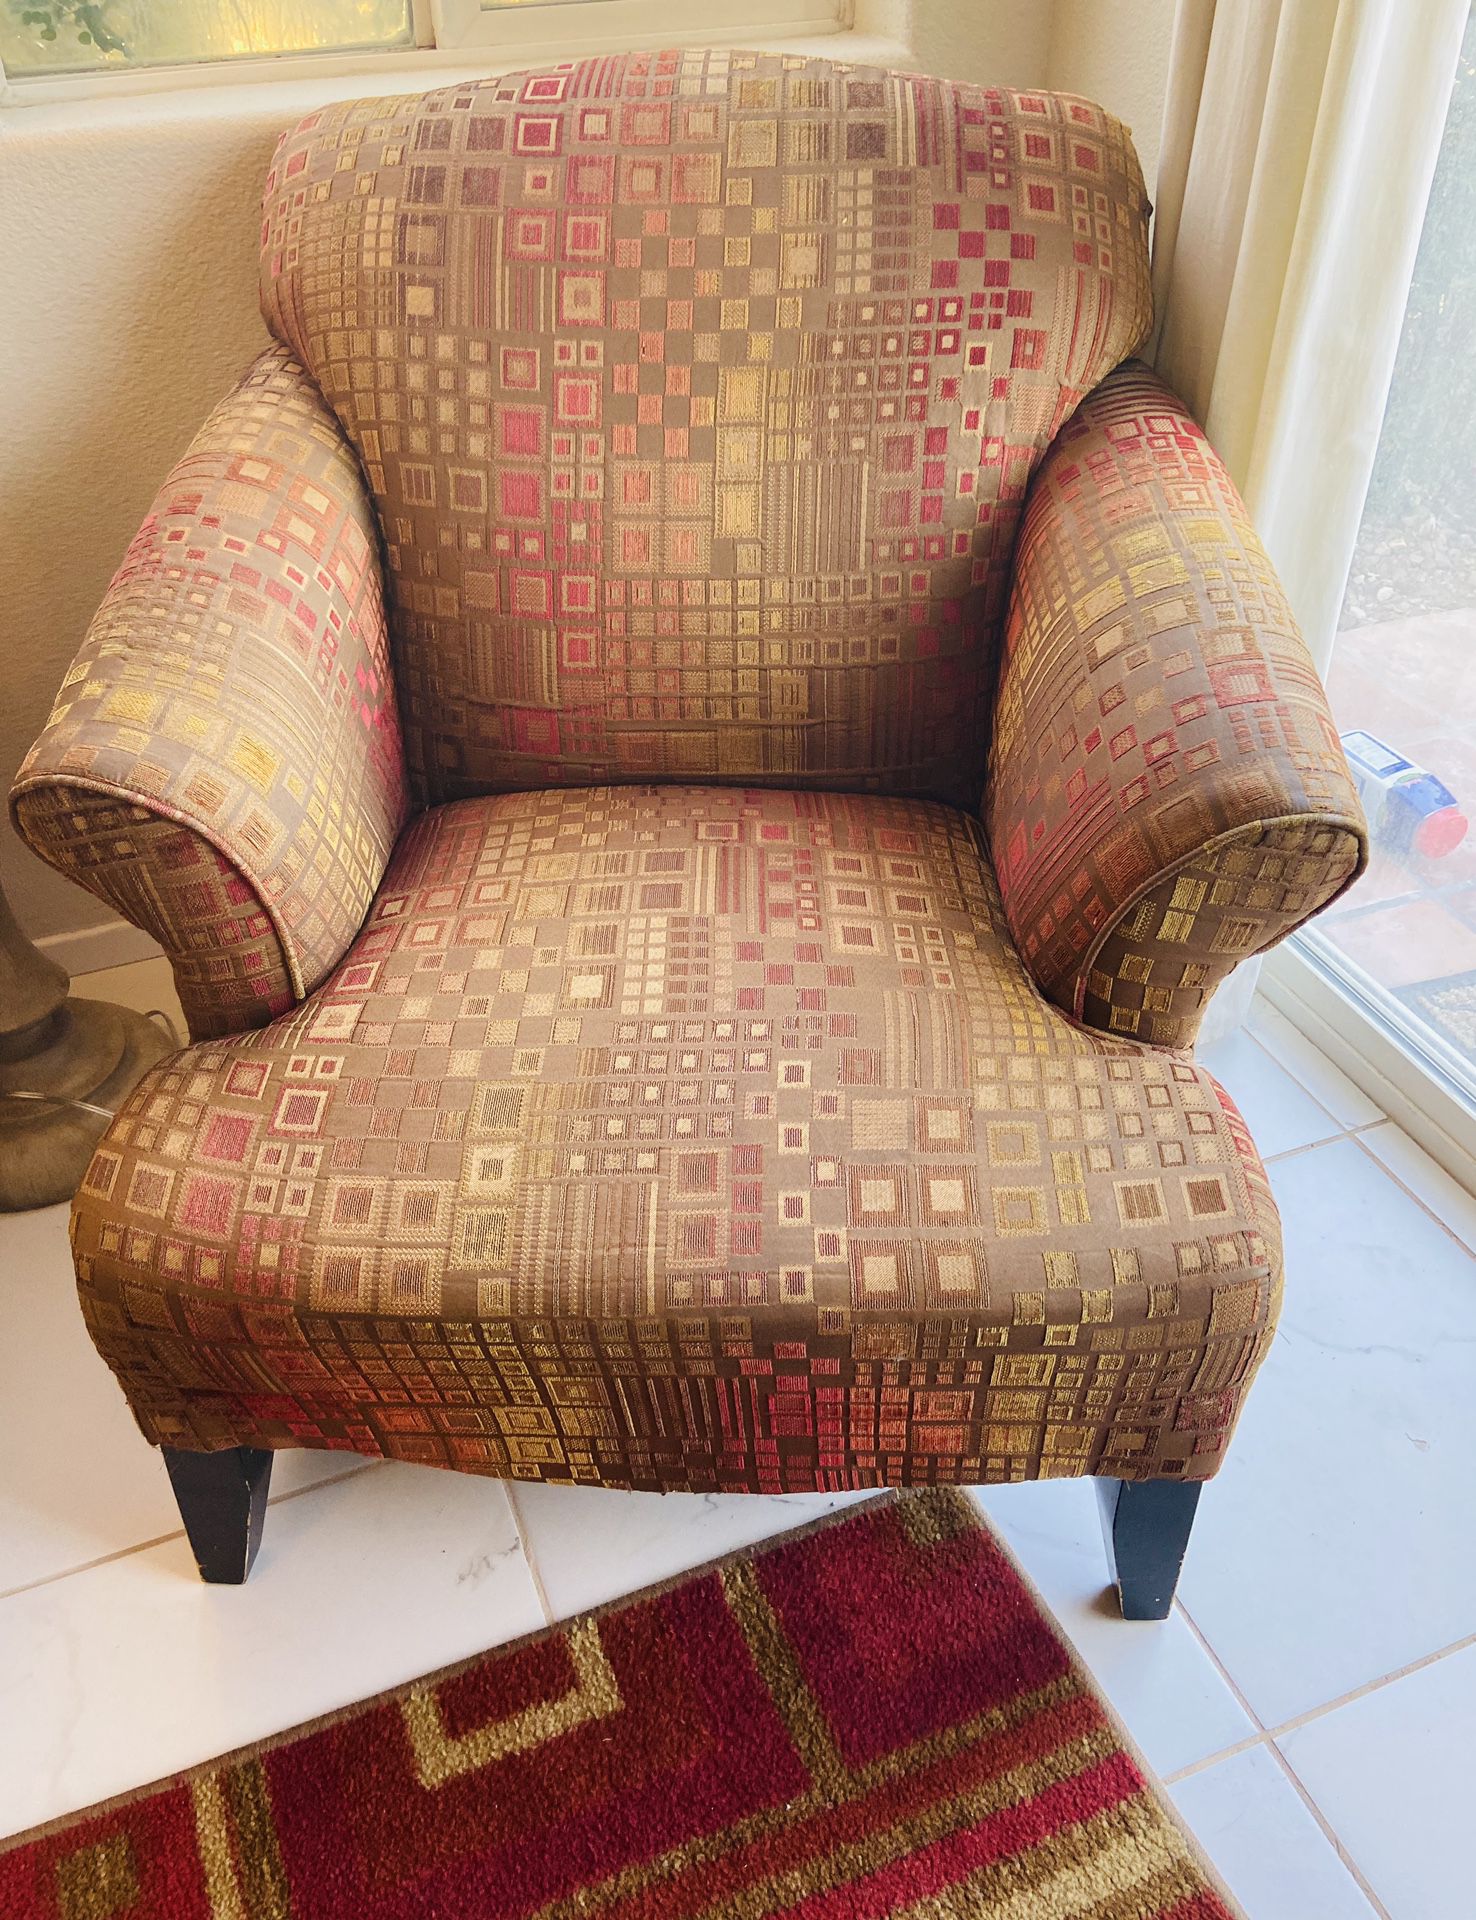 Mathis brothers chair with ottoman and matching pillow